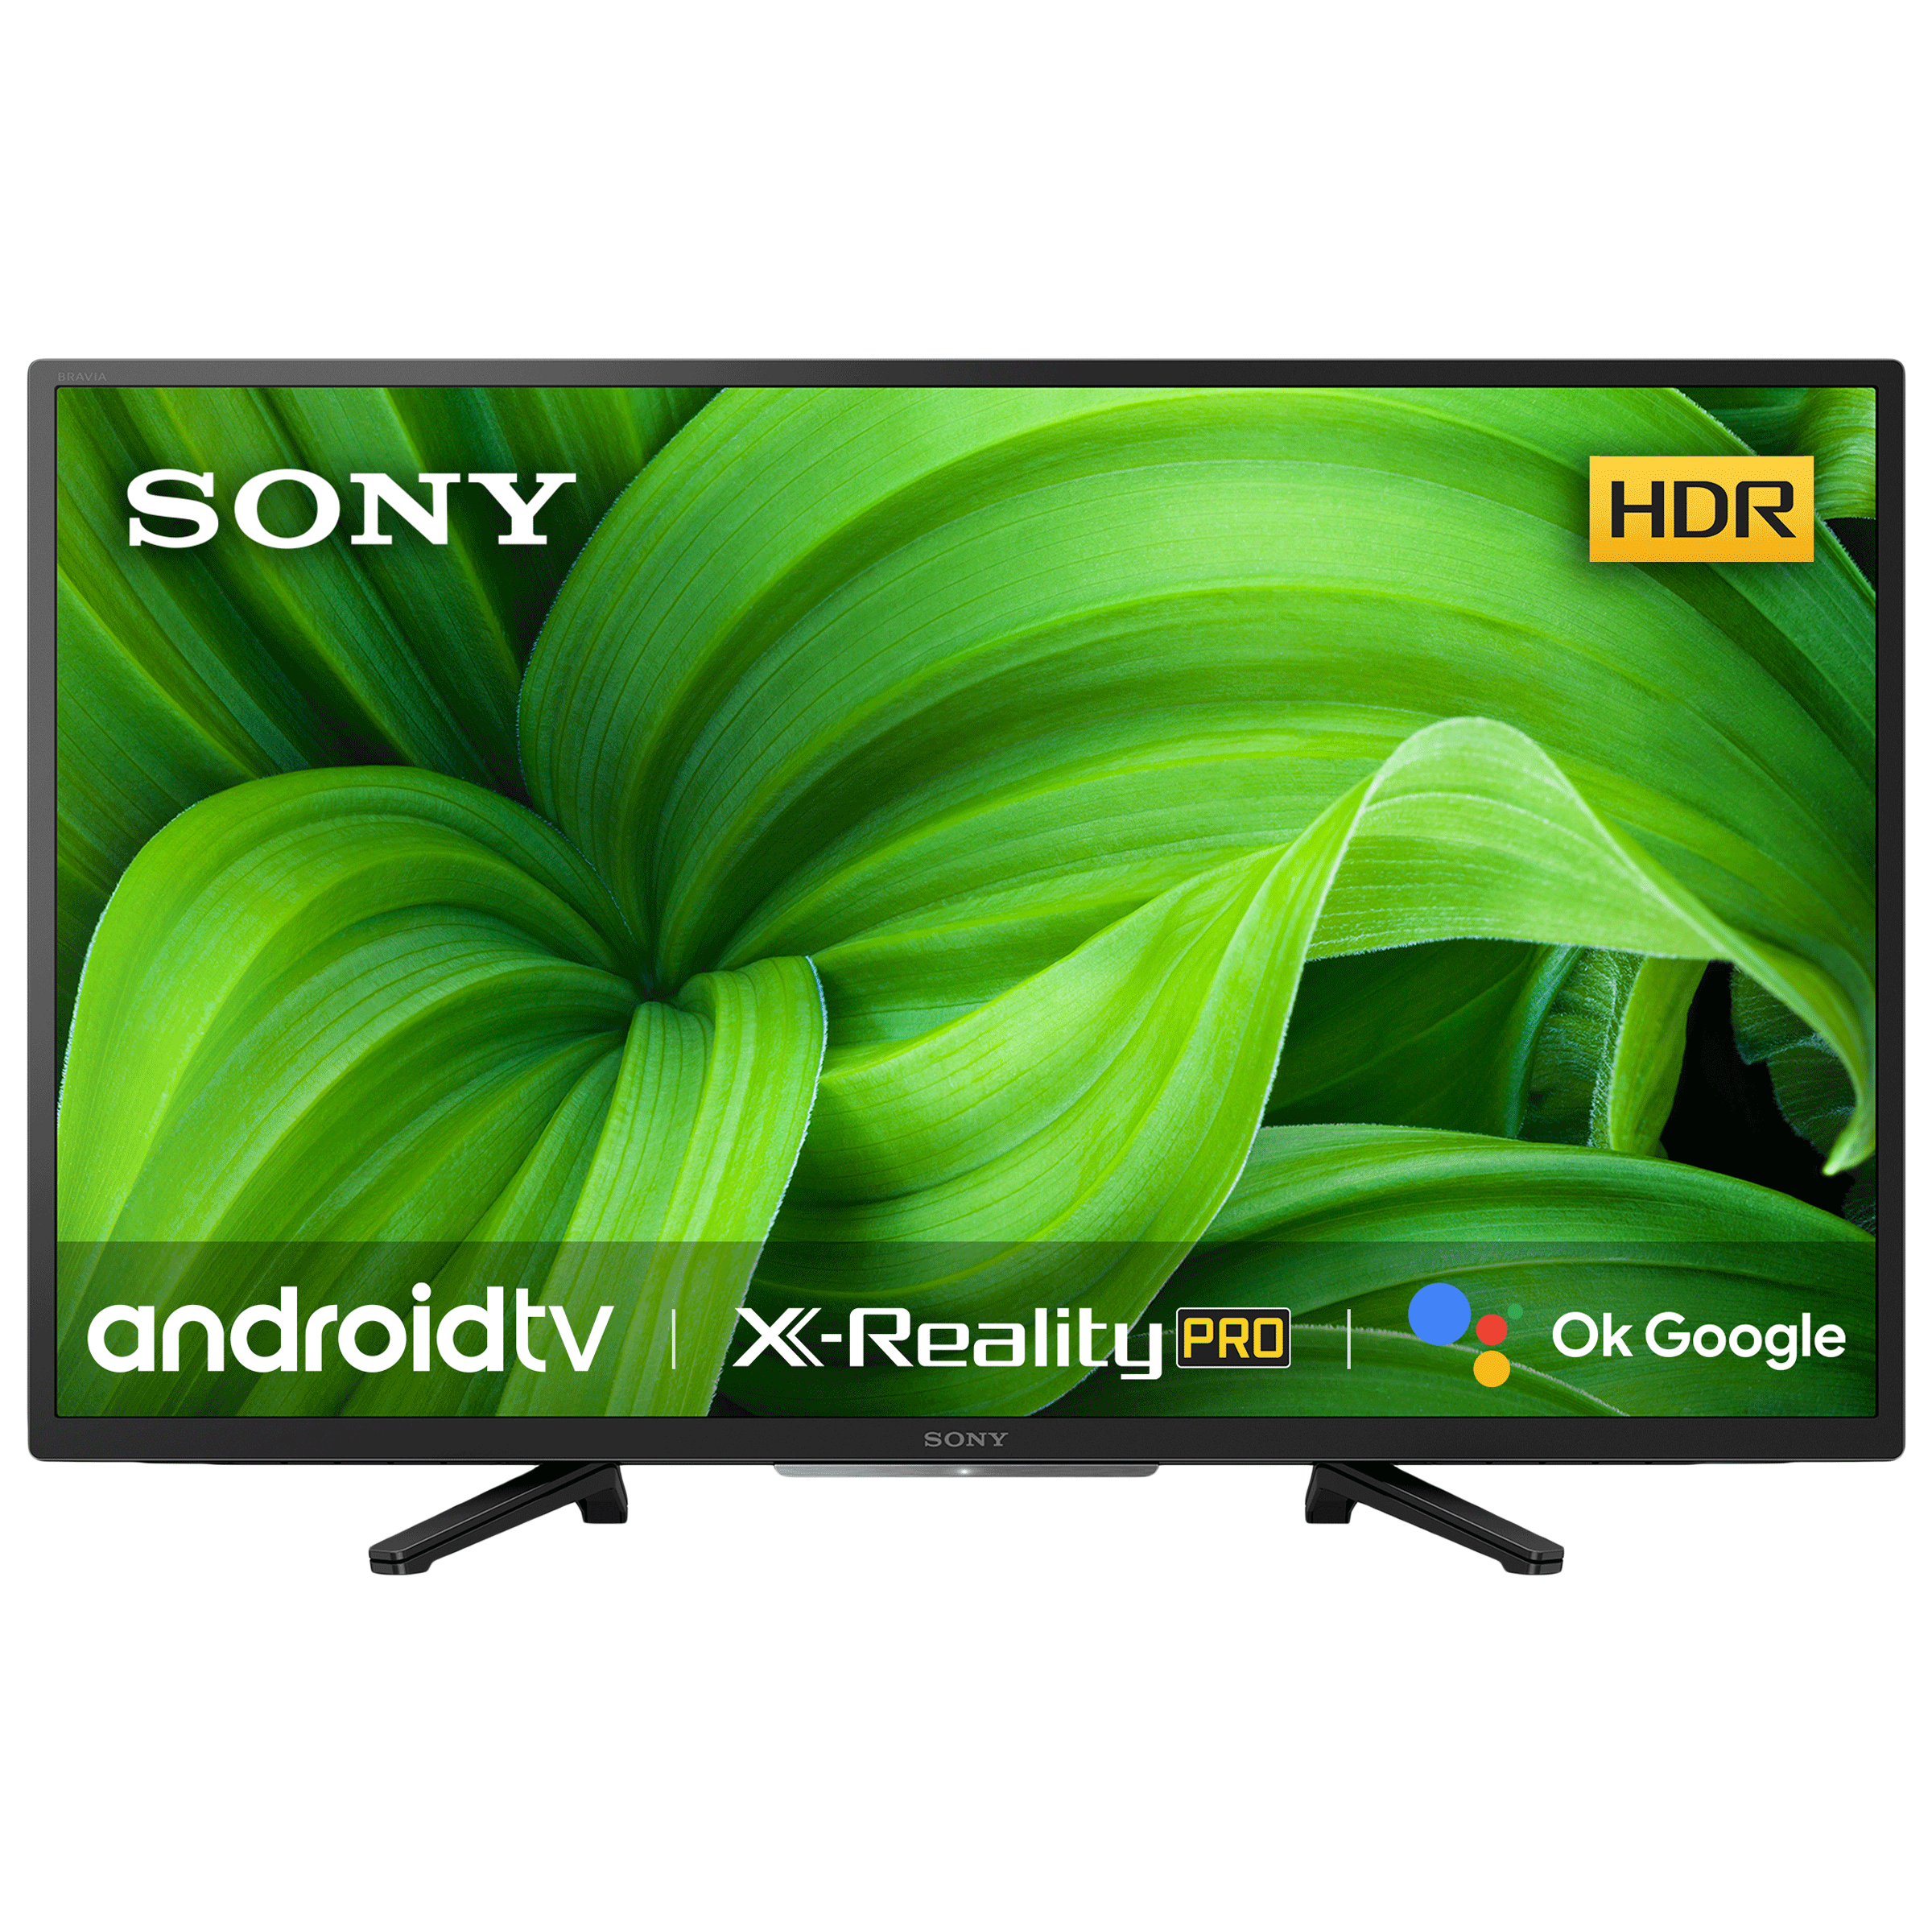 Sony Bravia W830 Series 80cm (32 Inch) HD Ready LED Android Smart TV (Voice Assistant Supported, KD-32W830, Black)